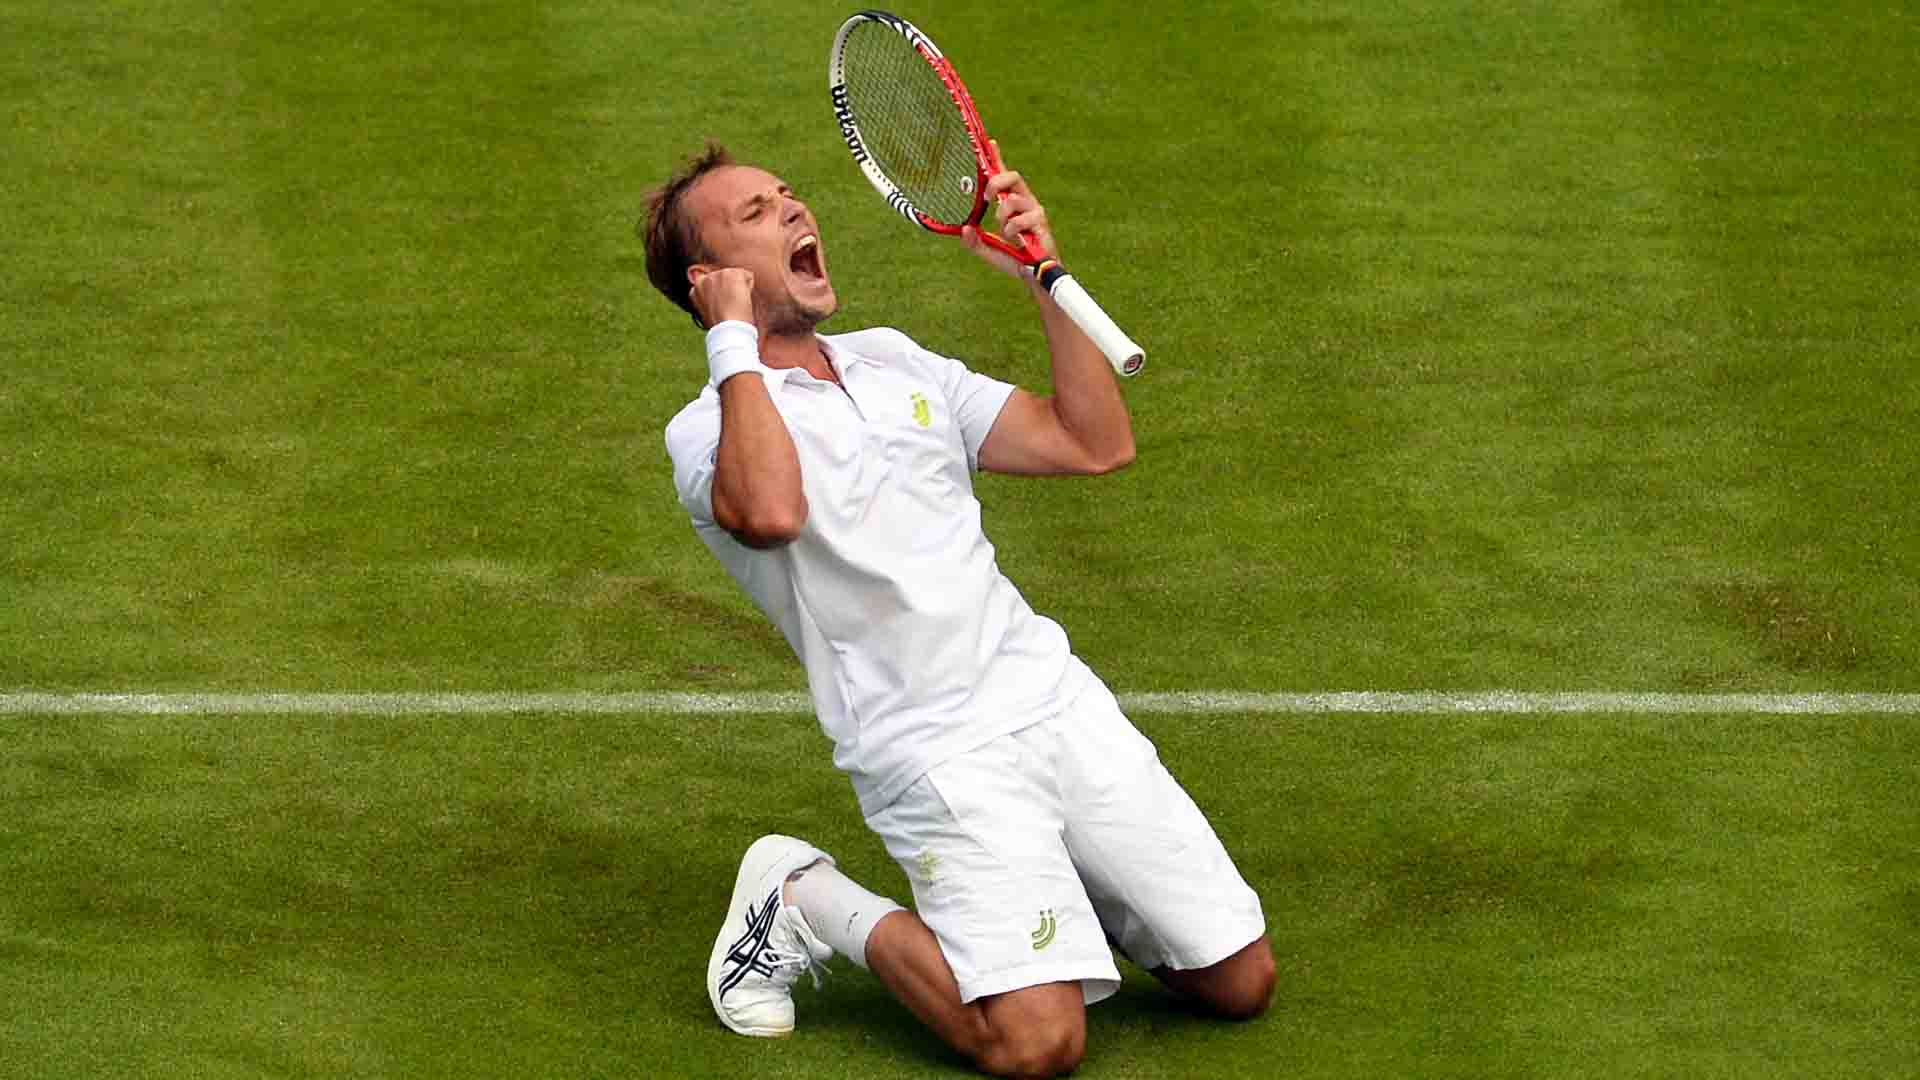 Steve Darcis defeated Rafael Nadal in straight sets in the first round at Wimbledon in 2013.